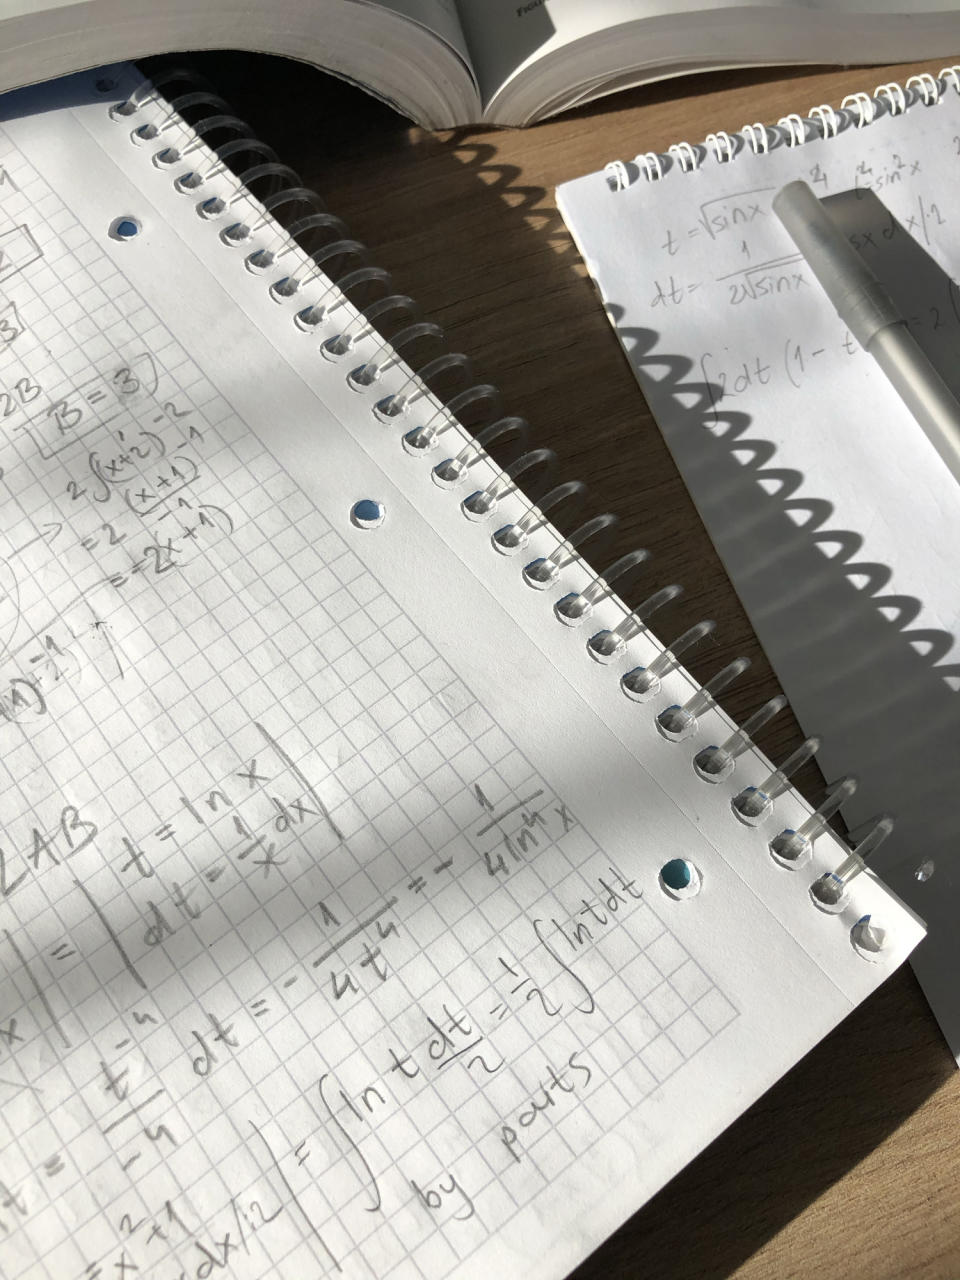 Handwritten mathematical calculations in a notebook with a pen resting on it